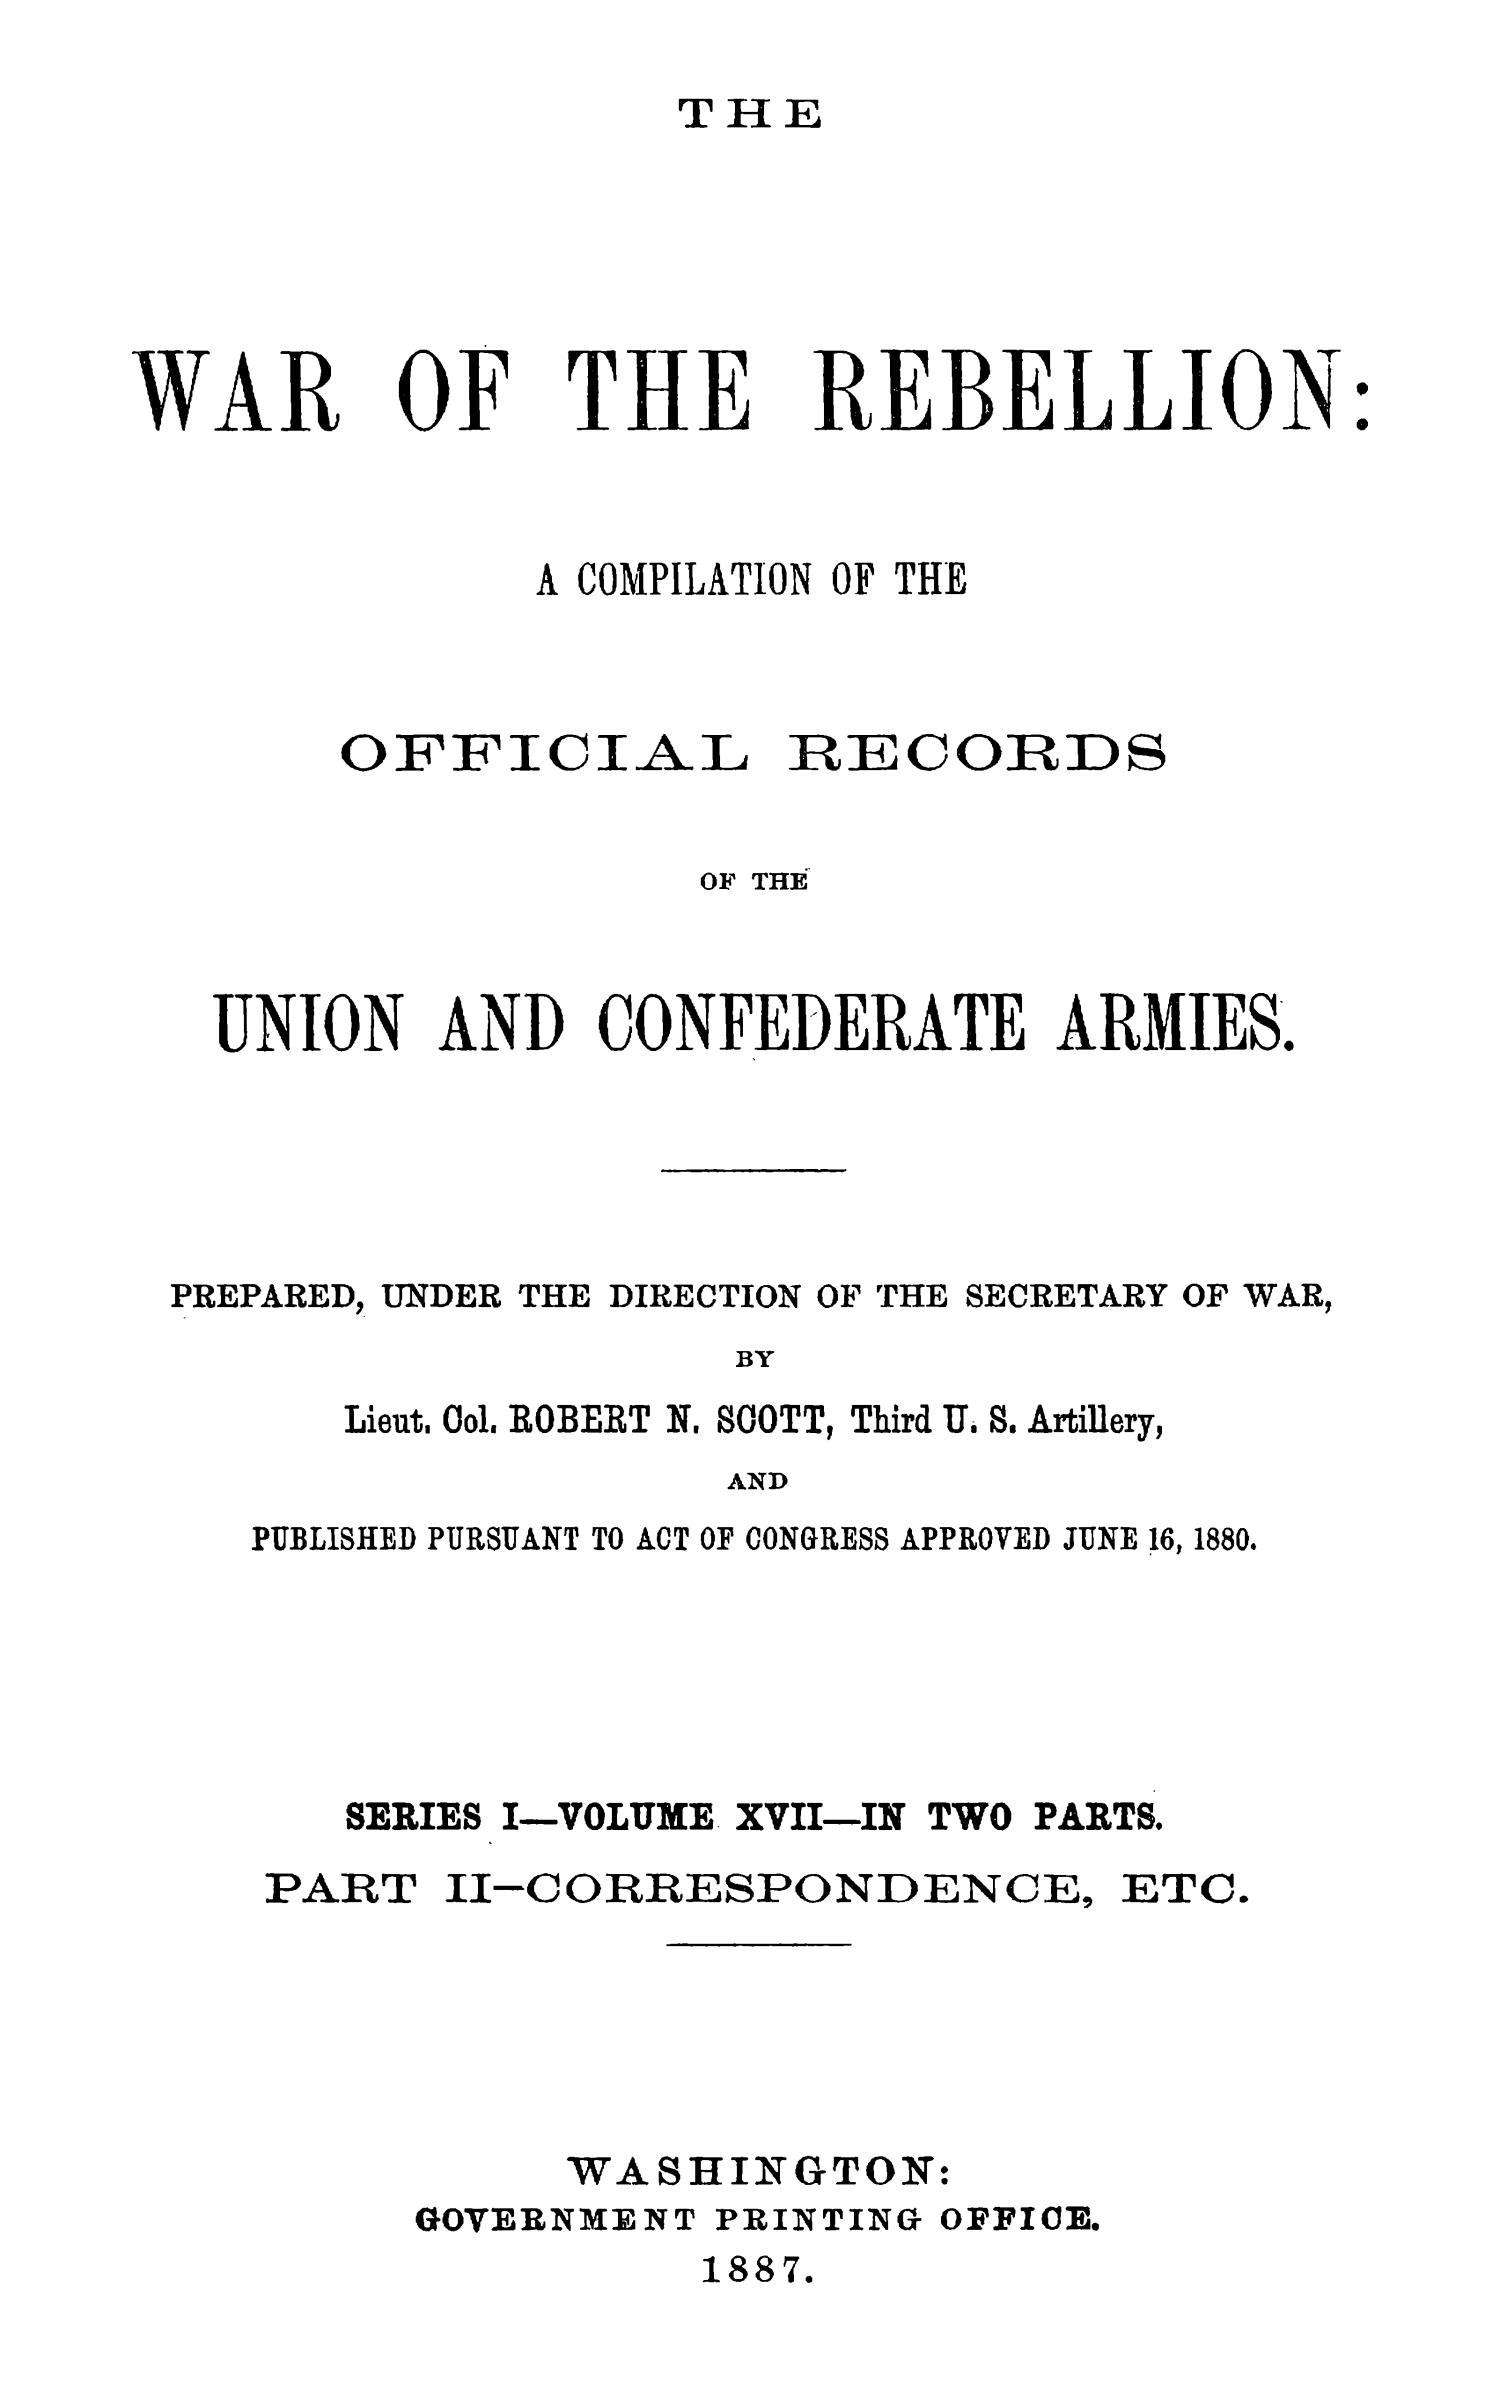 The War of the Rebellion: A Compilation of the Official Records of the Union And Confederate Armies. Series 1, Volume 17, In Two Parts. Part 2, Correspondence, etc.
                                                
                                                    1
                                                